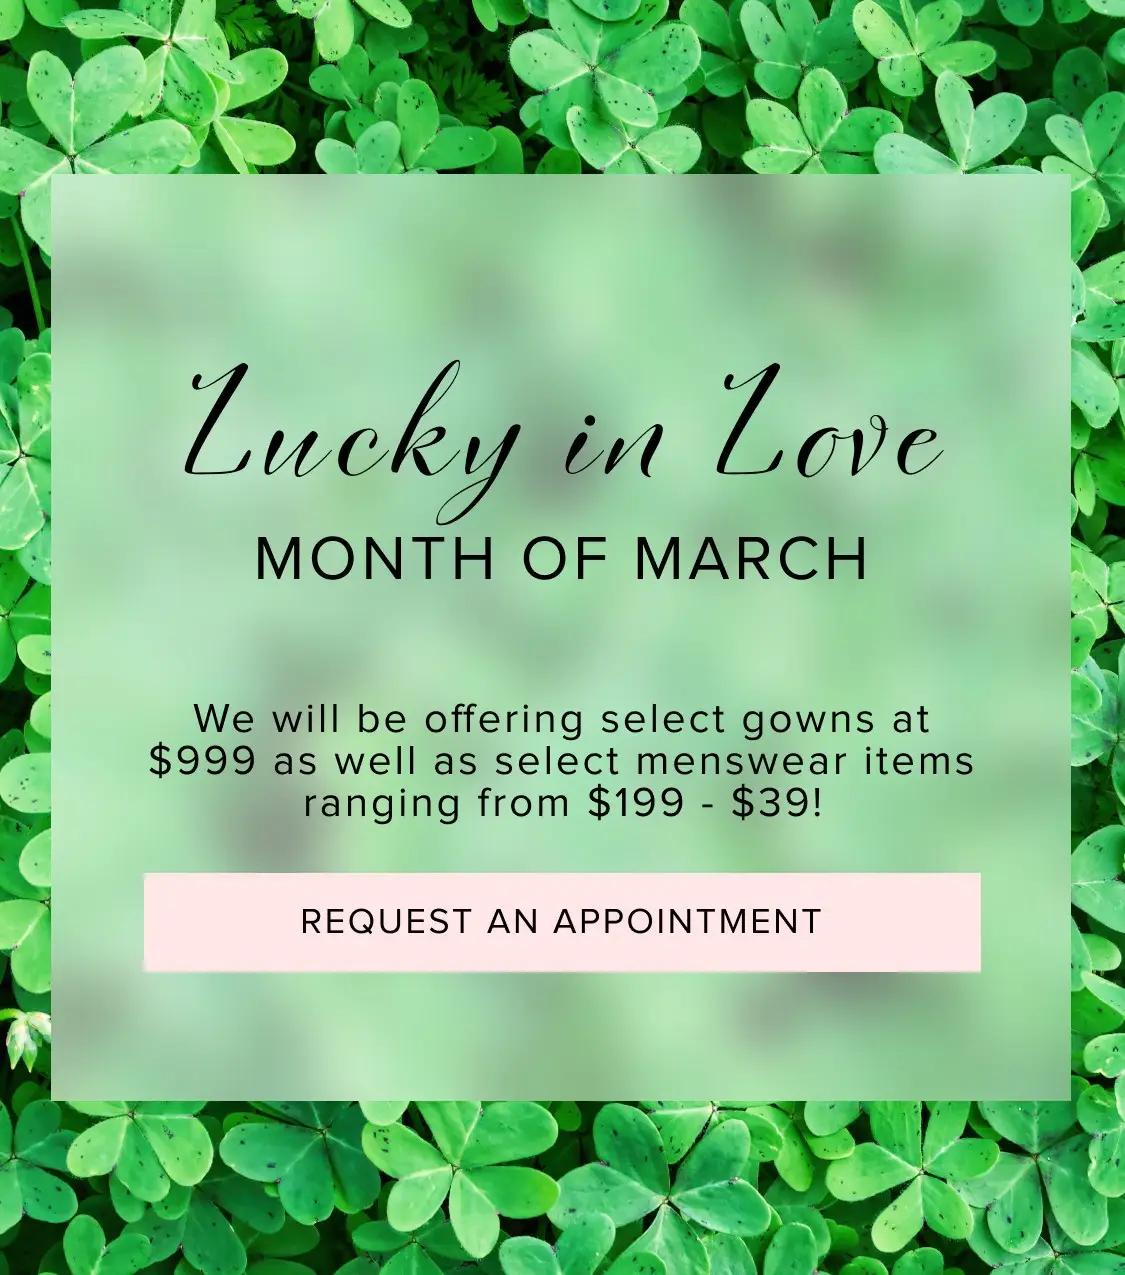 Lucky in Love March event at After 5 Bridal & Gentleman Jacks